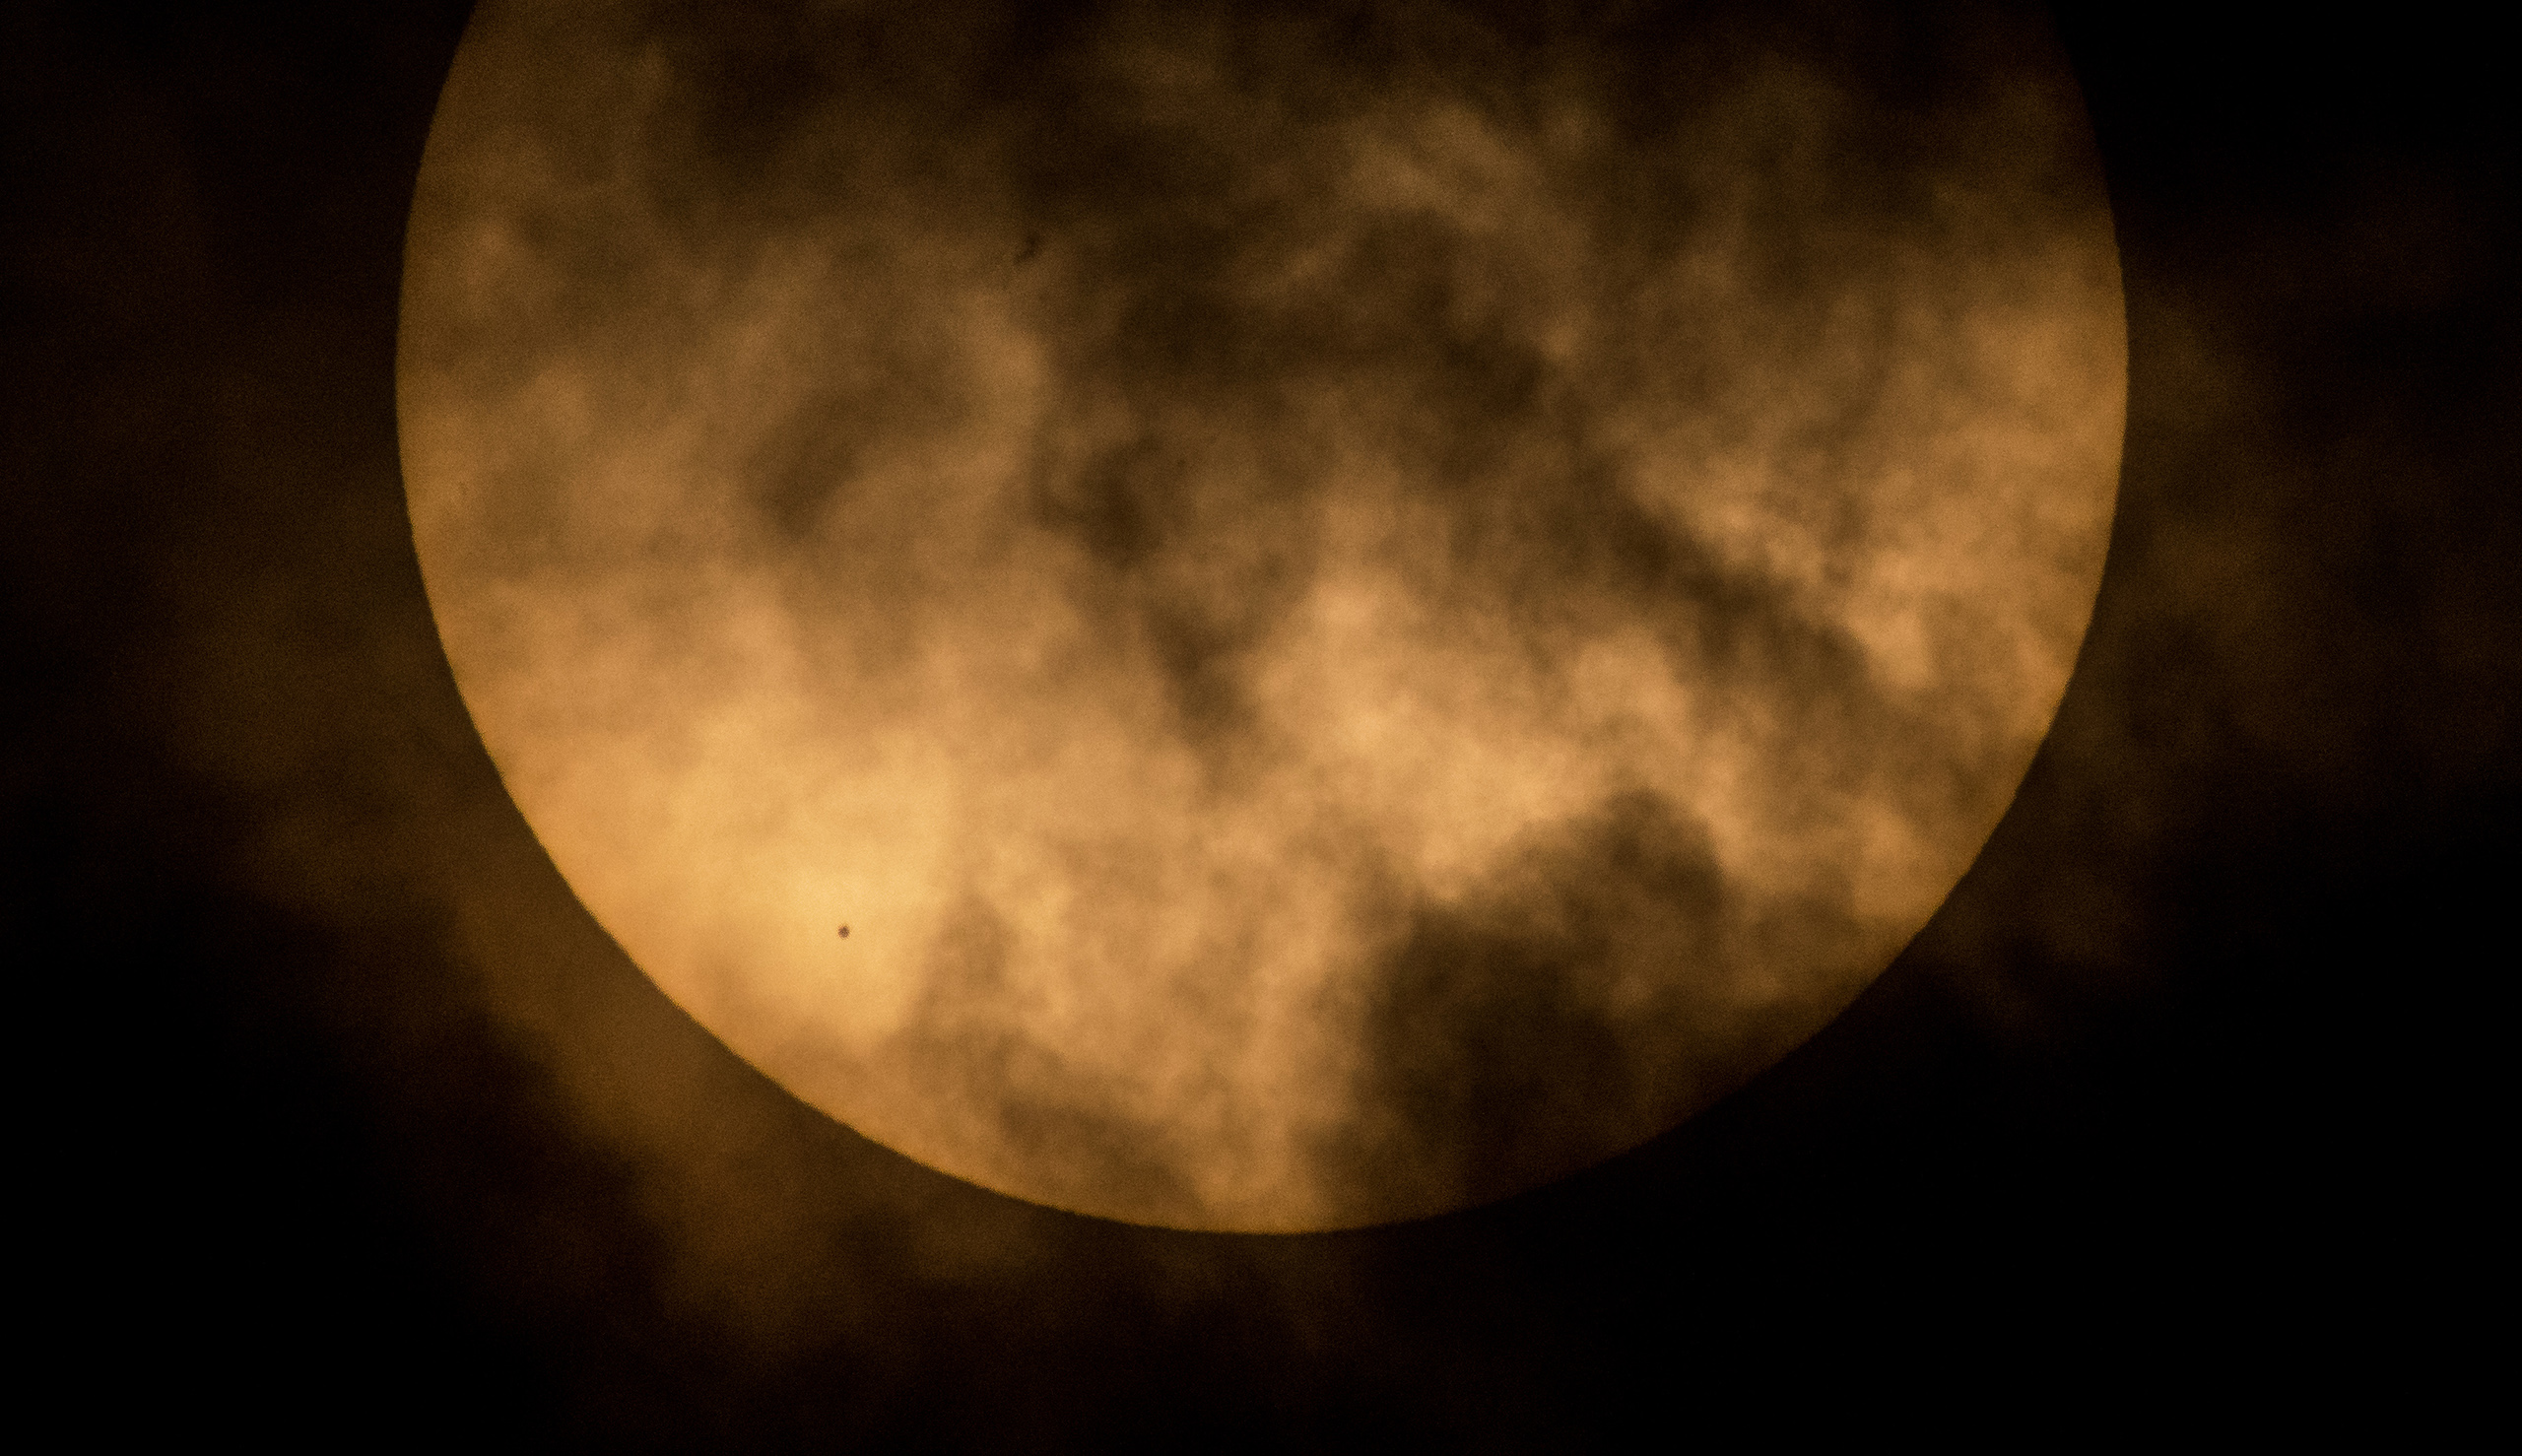 The planet Mercury is seen in silhouette, lower left, as it transits across the face of the sun in this photo taken from NASA Headquarters in Washington, DC., May 9, 2016. (Joel Kowsky—NASA)